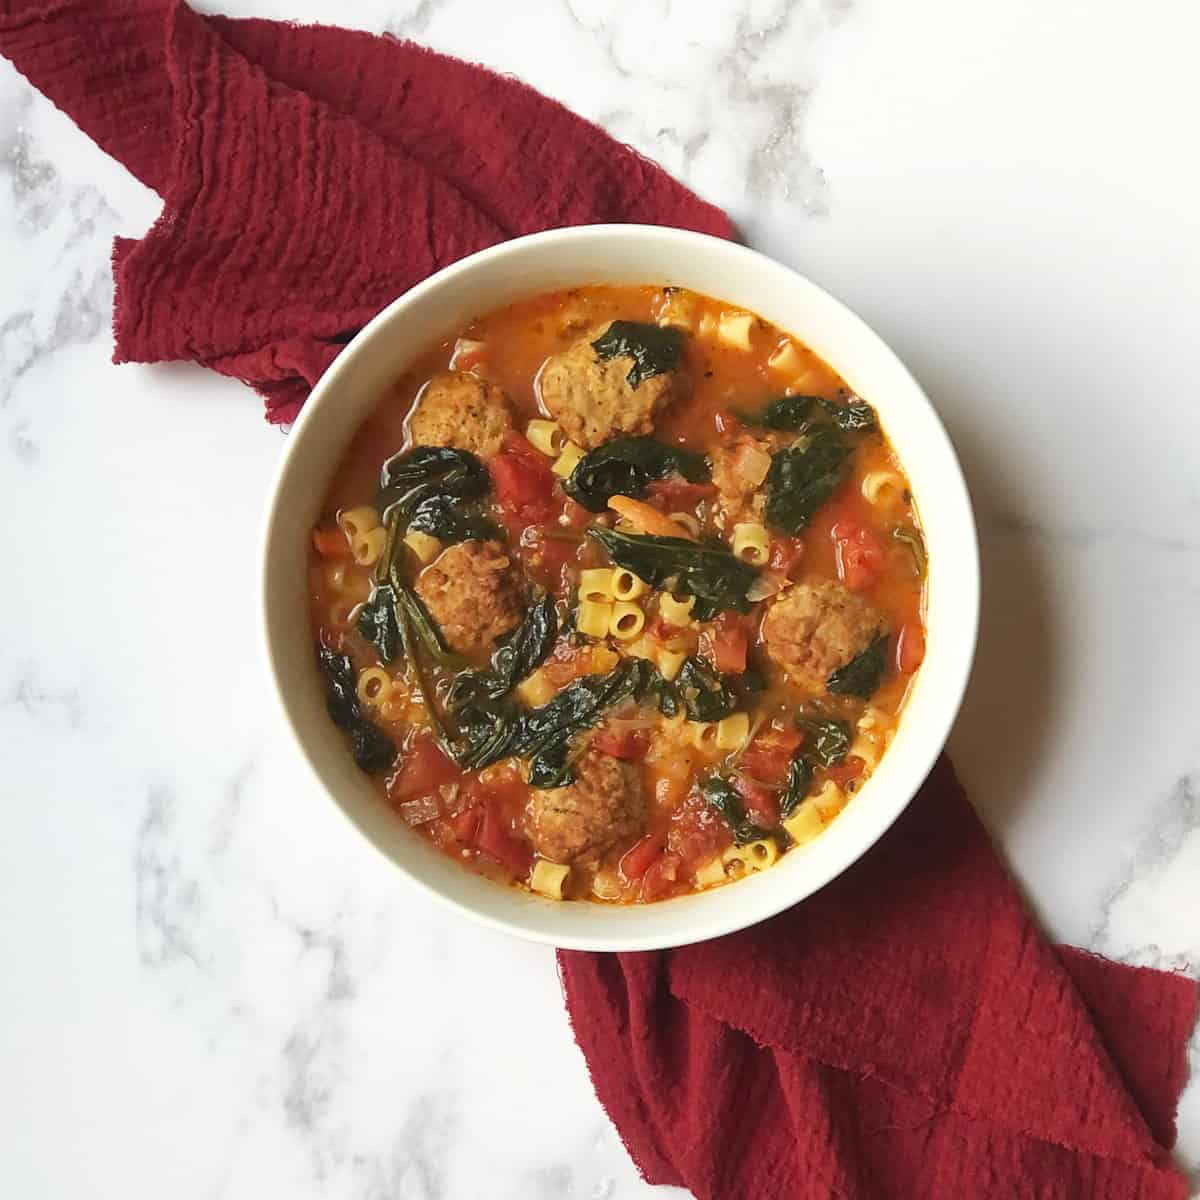 Lactation Soup (soup with spinach, meatballs, and pasta) in a white bowl on a red linen